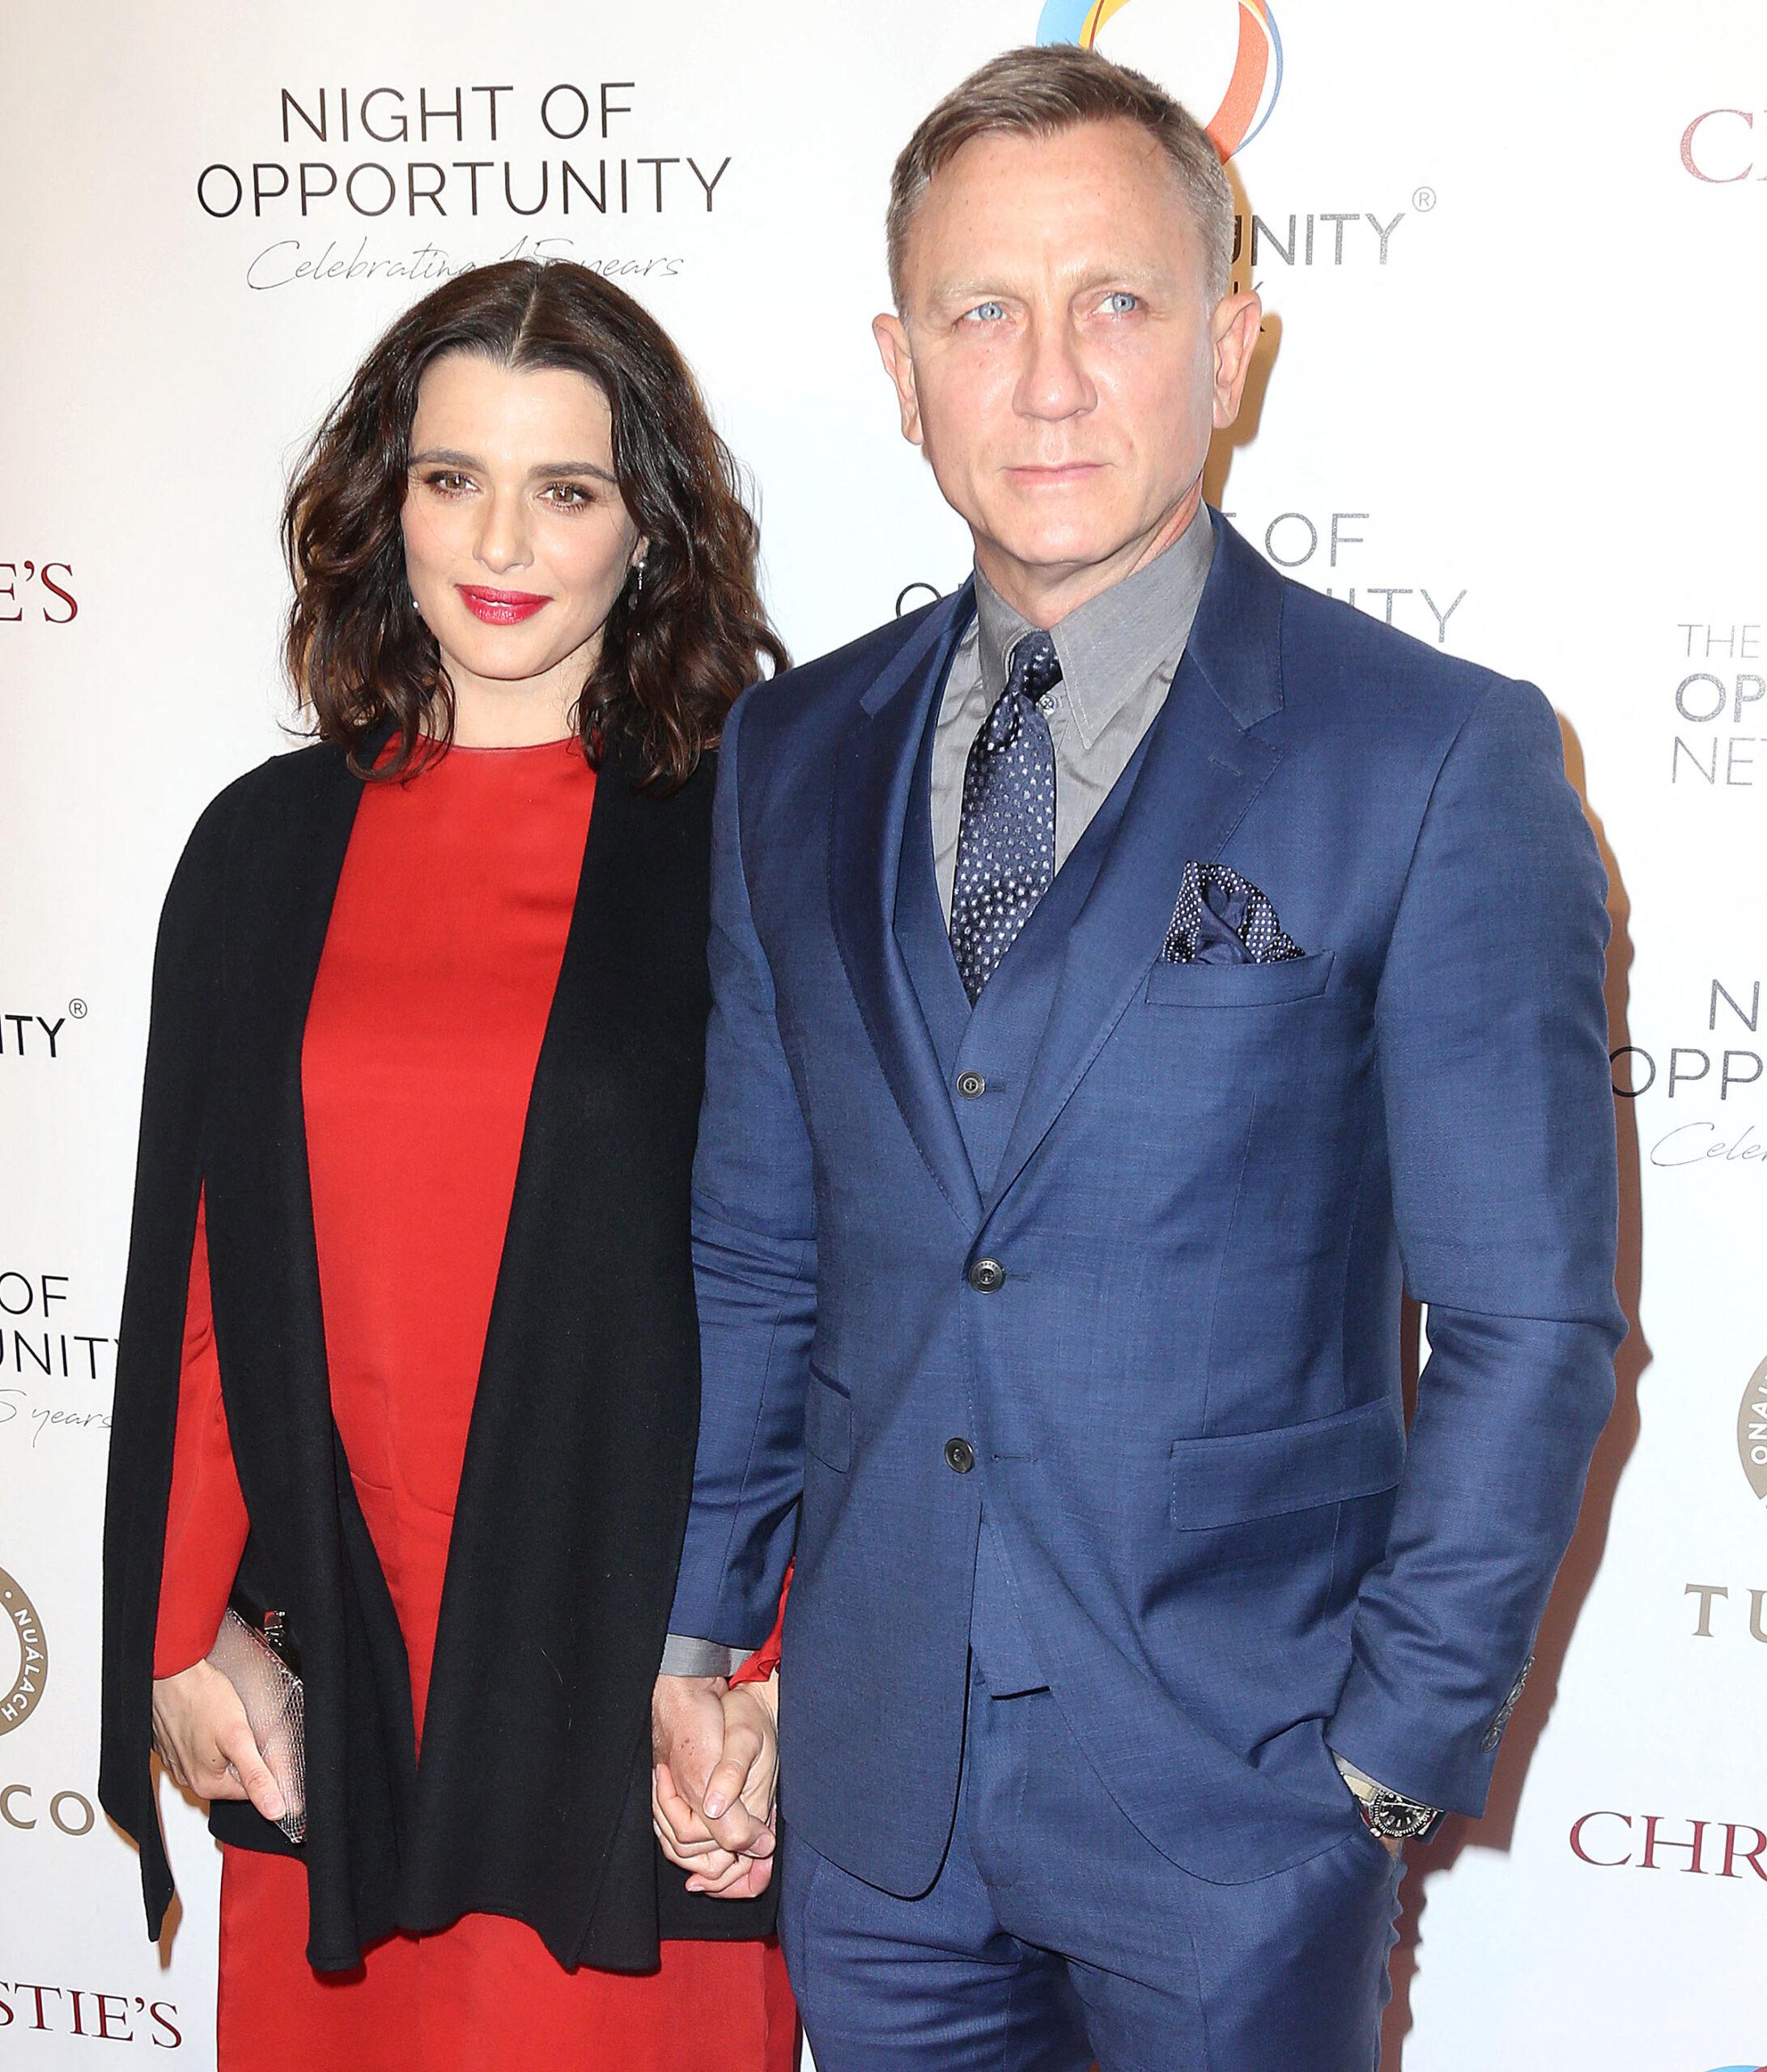 Rachel Weisz and Daniel Craig at The Opportunity Networks 11th Annual Night of Opportunity Gala - New York